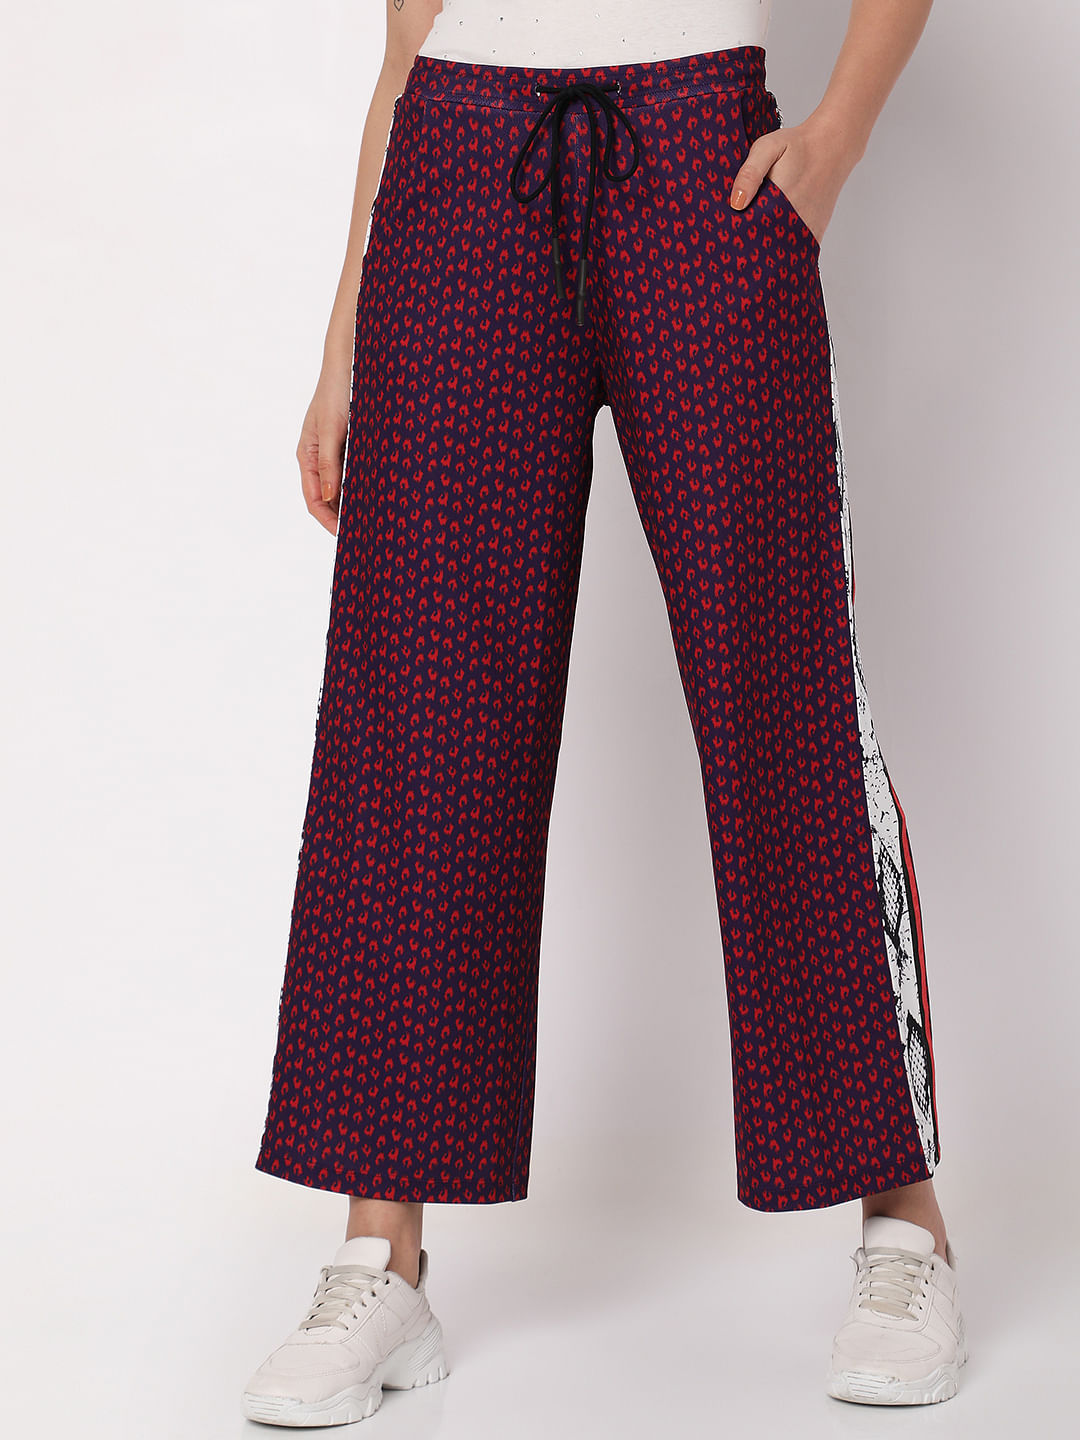 Odel Solid Colour Palazzo Pant | Odel.lk